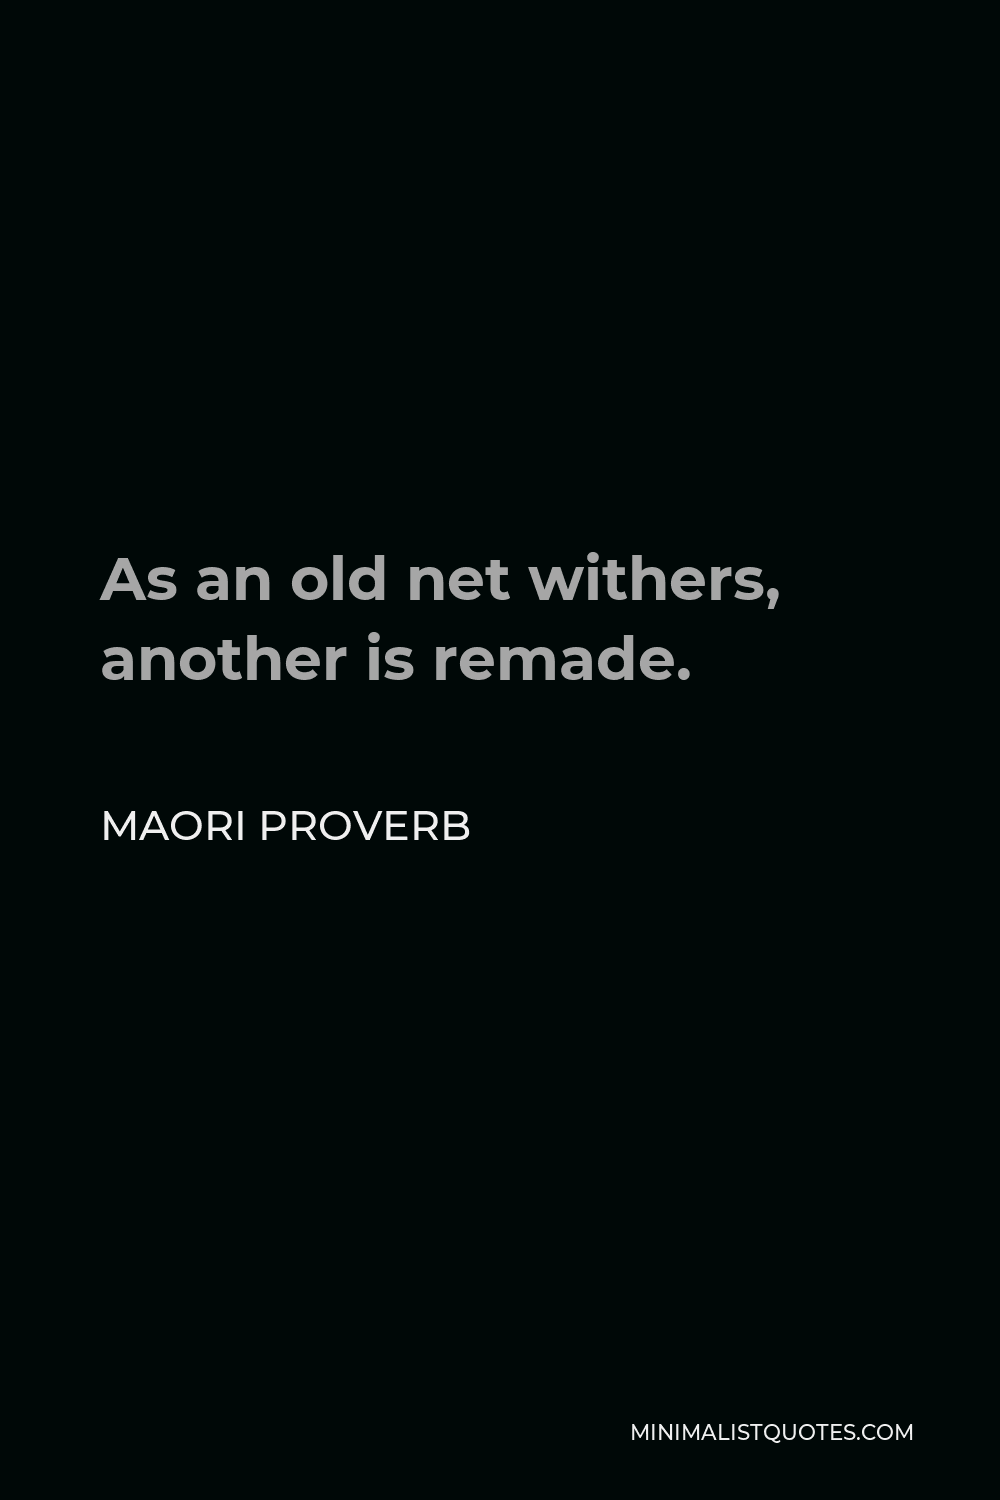 Maori Proverb Quote - As an old net withers, another is remade.